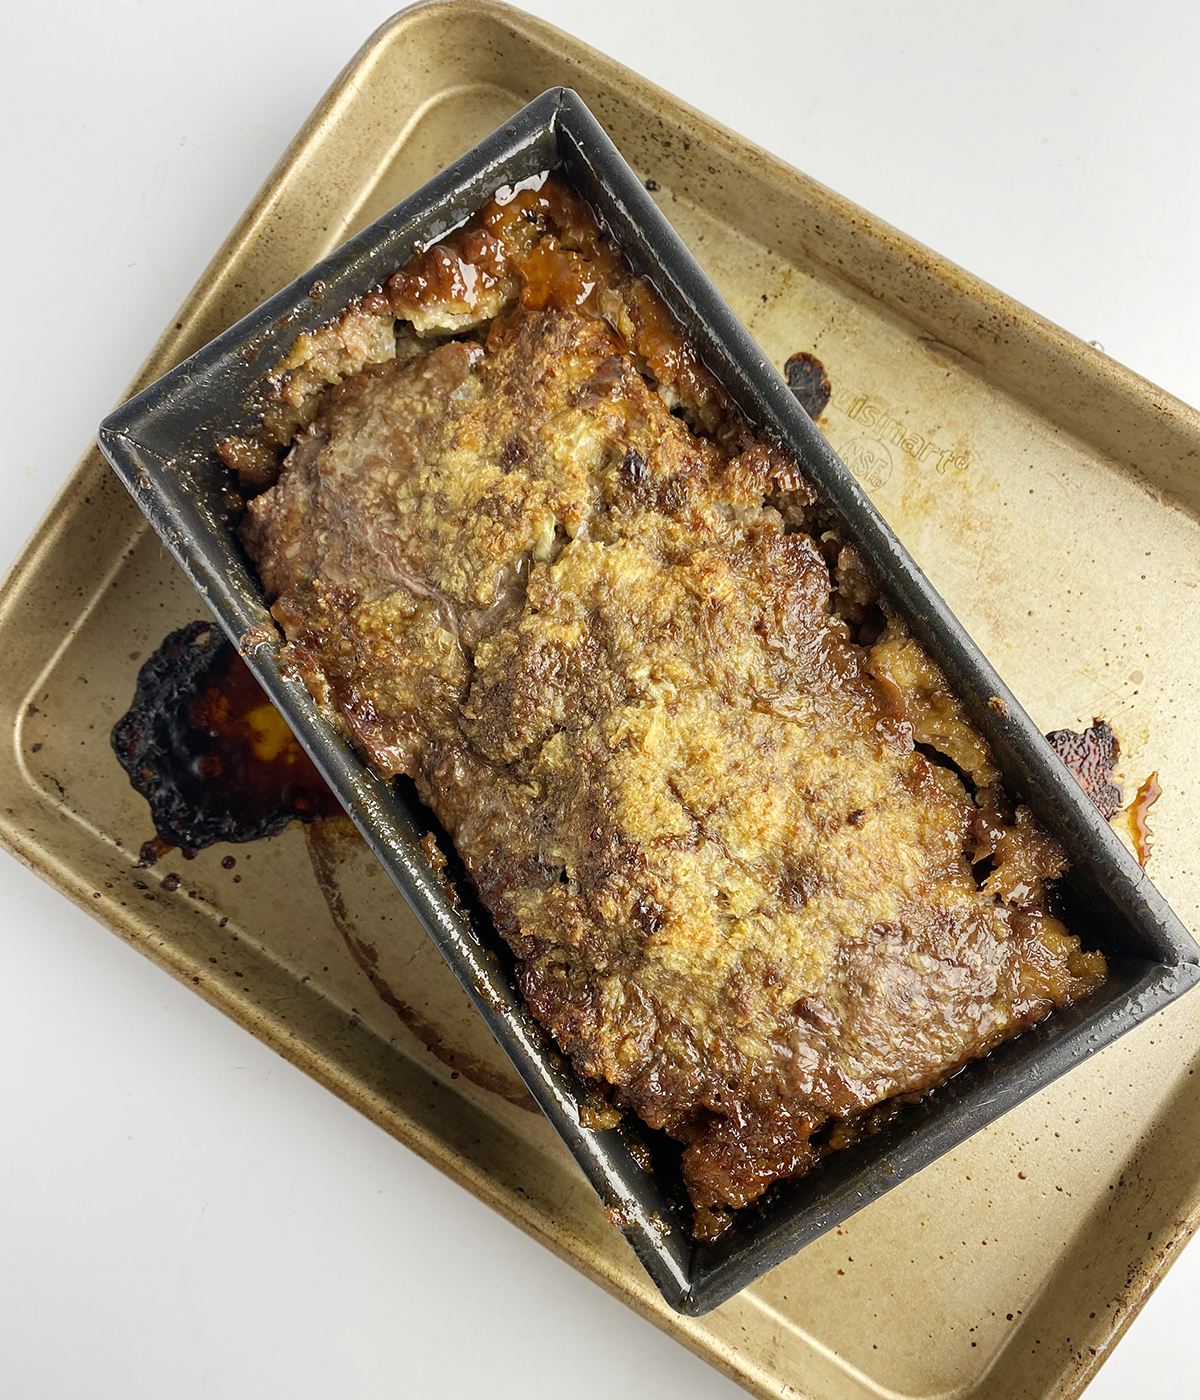 Baked brown sugar meatloaf on a baking tray.